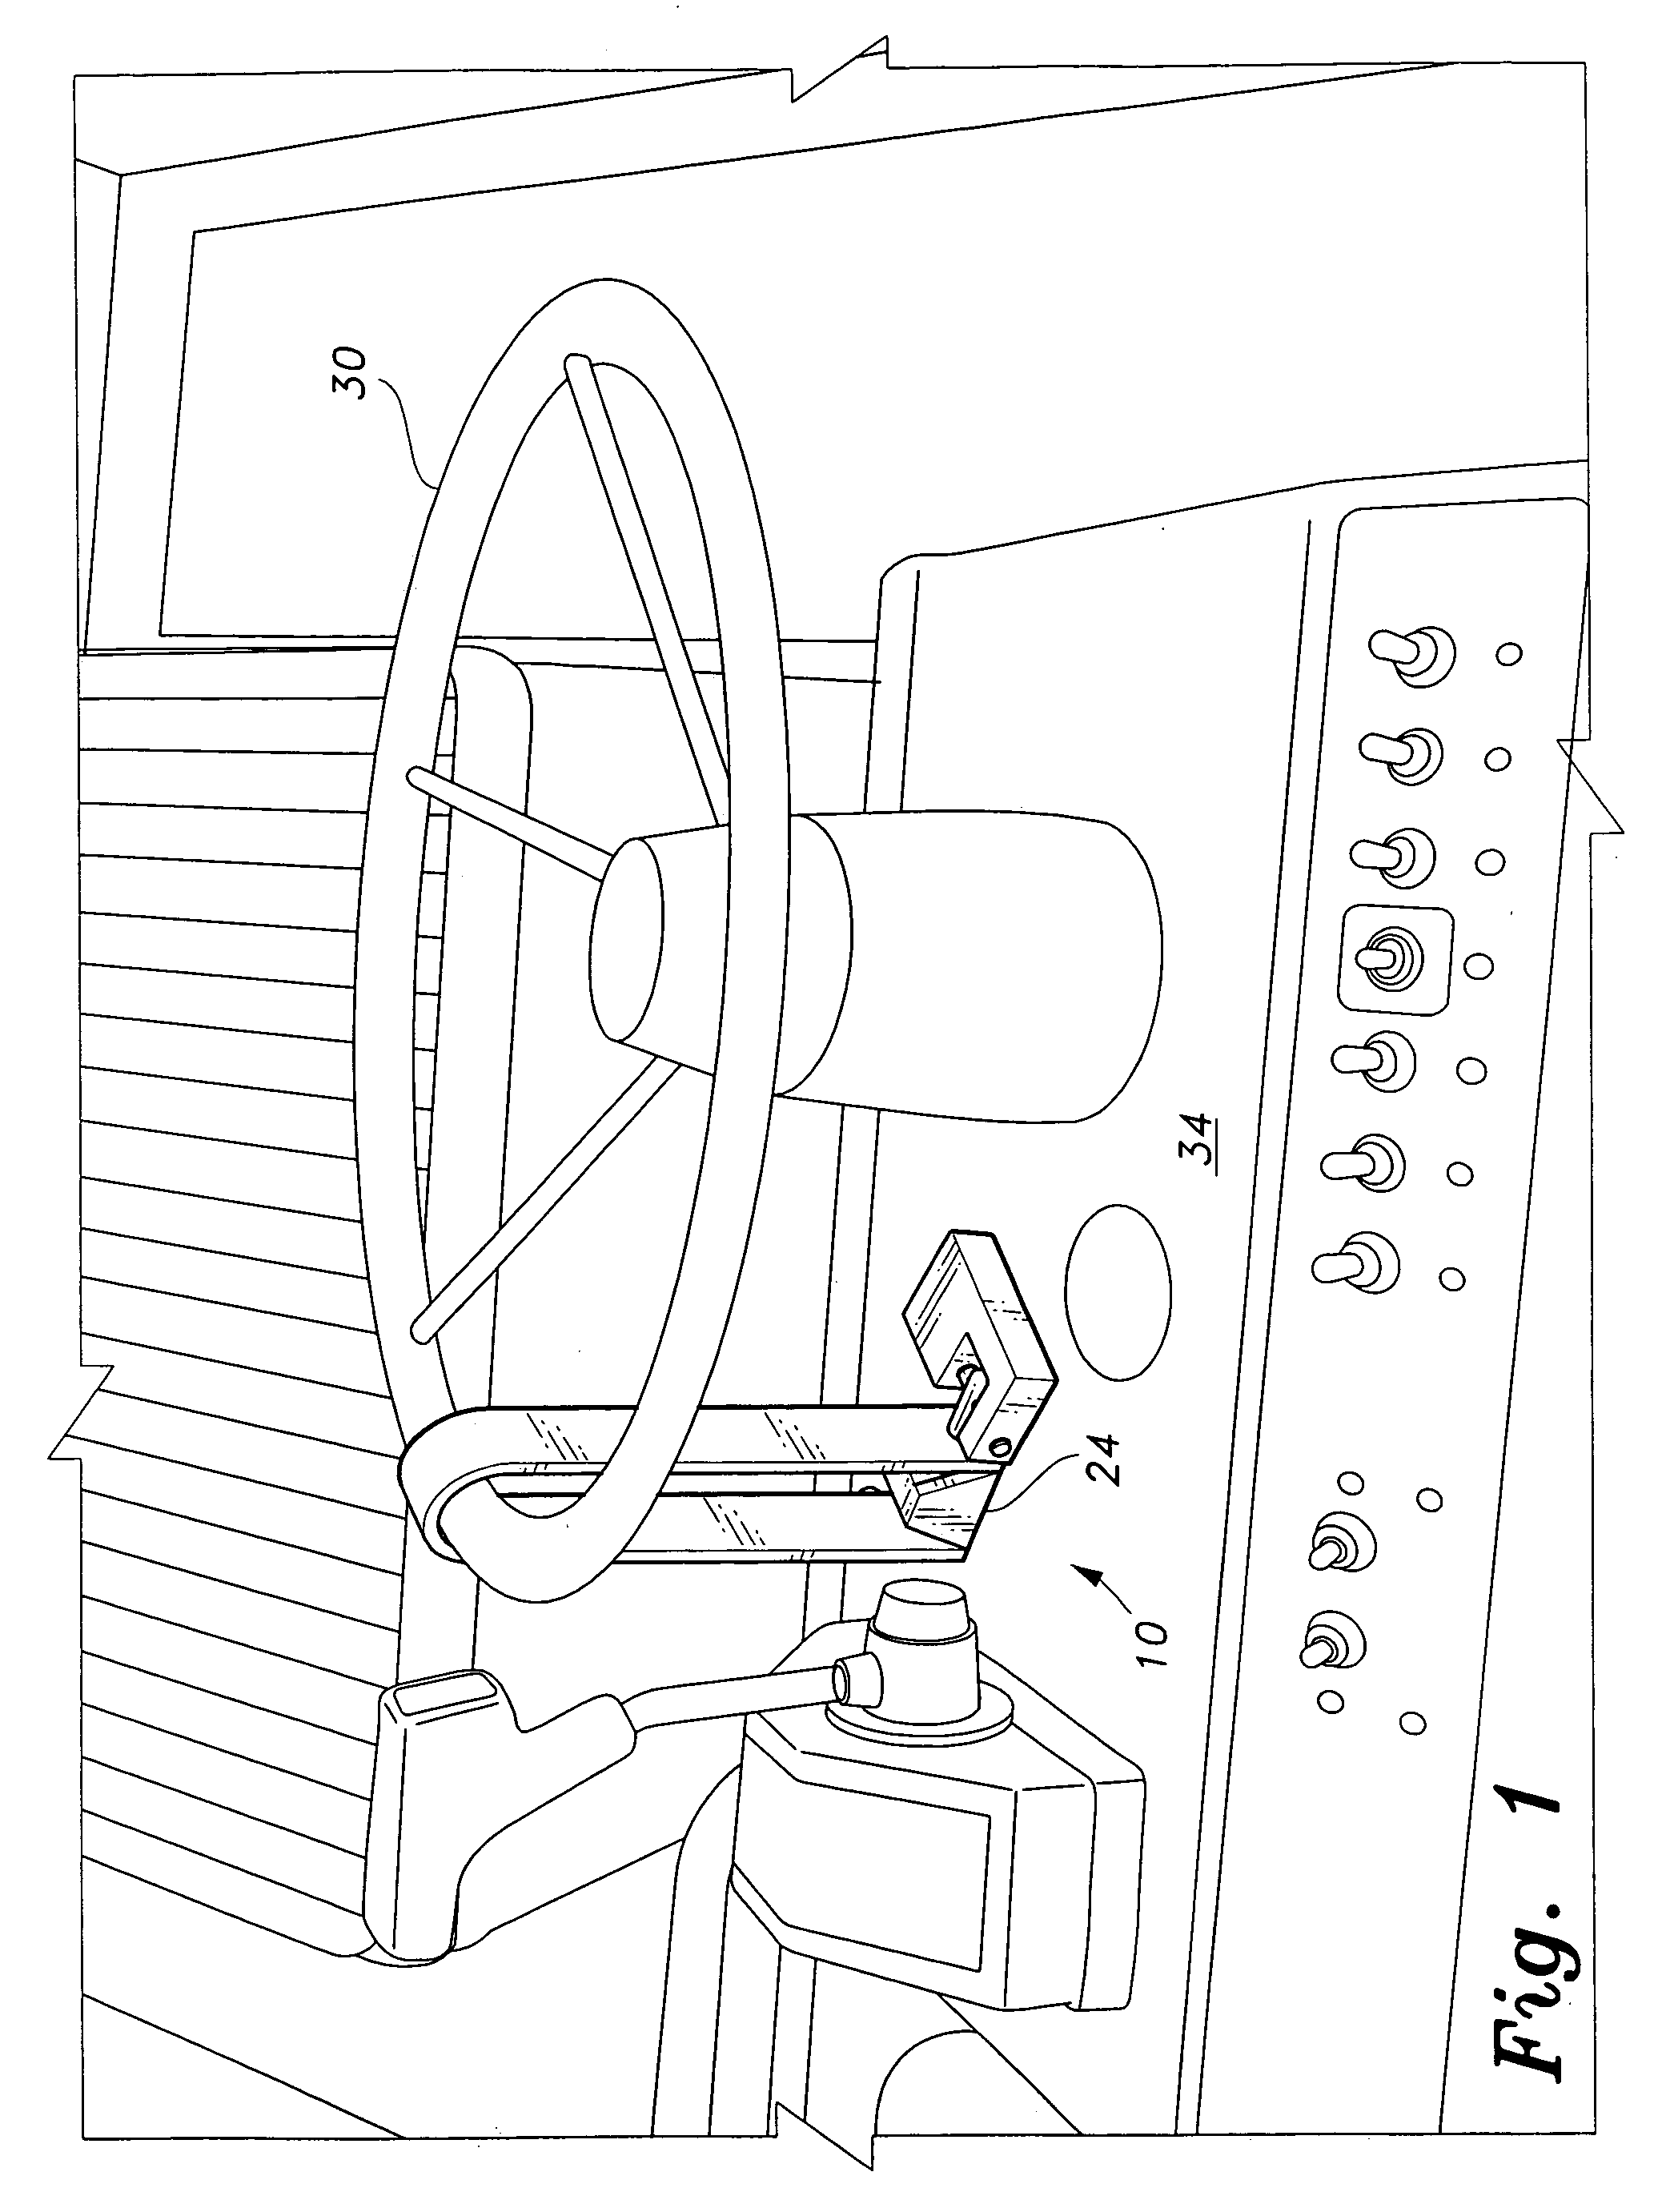 Anti-theft device for equipment